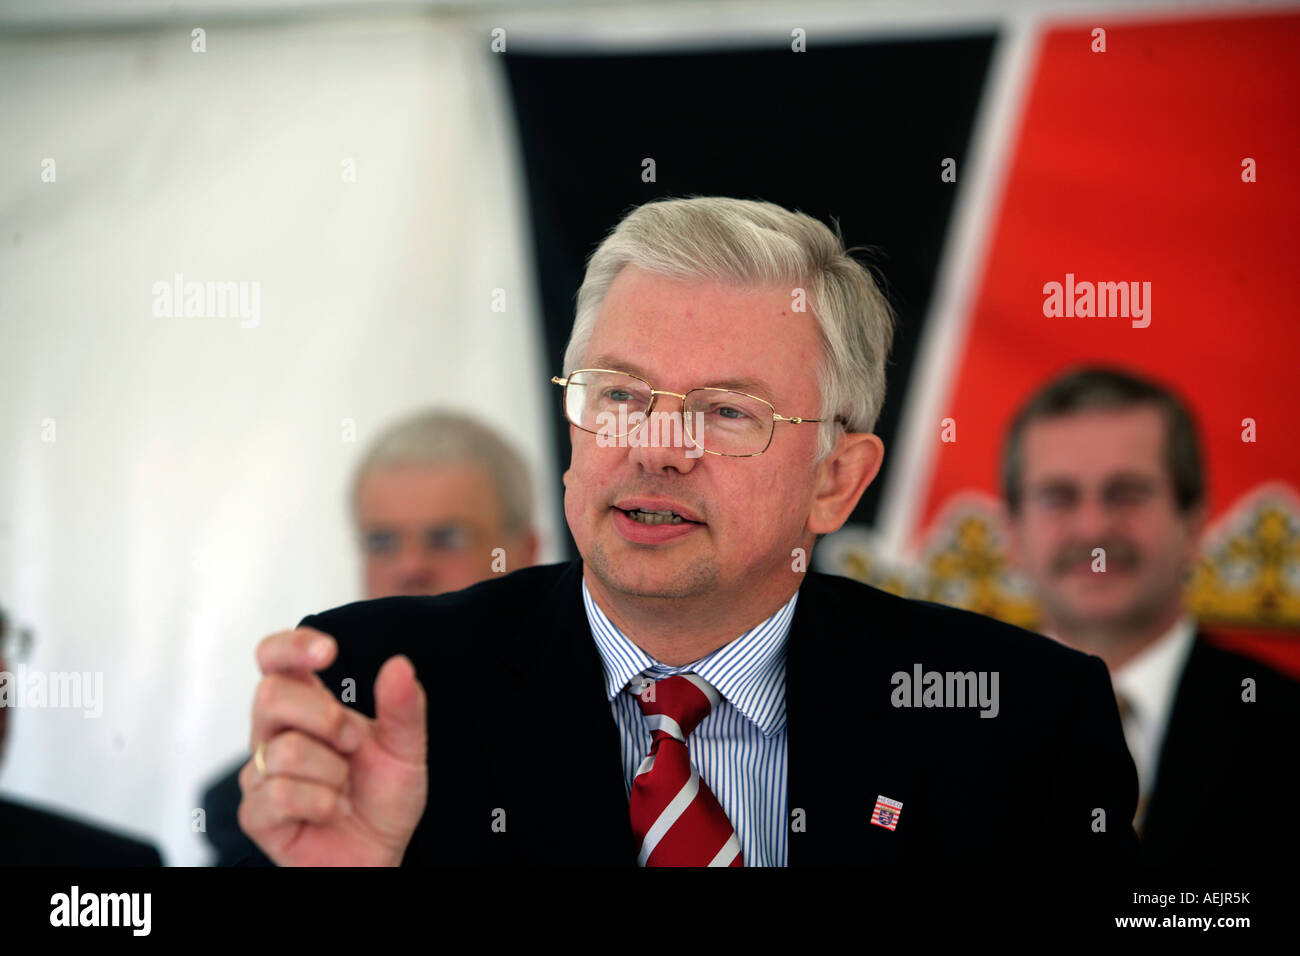 Prime minister of Hesse Roland Koch (CDU) at an election campaign appearance, 24.08.2005, Rhineland-Palatinate, Germany Stock Photo